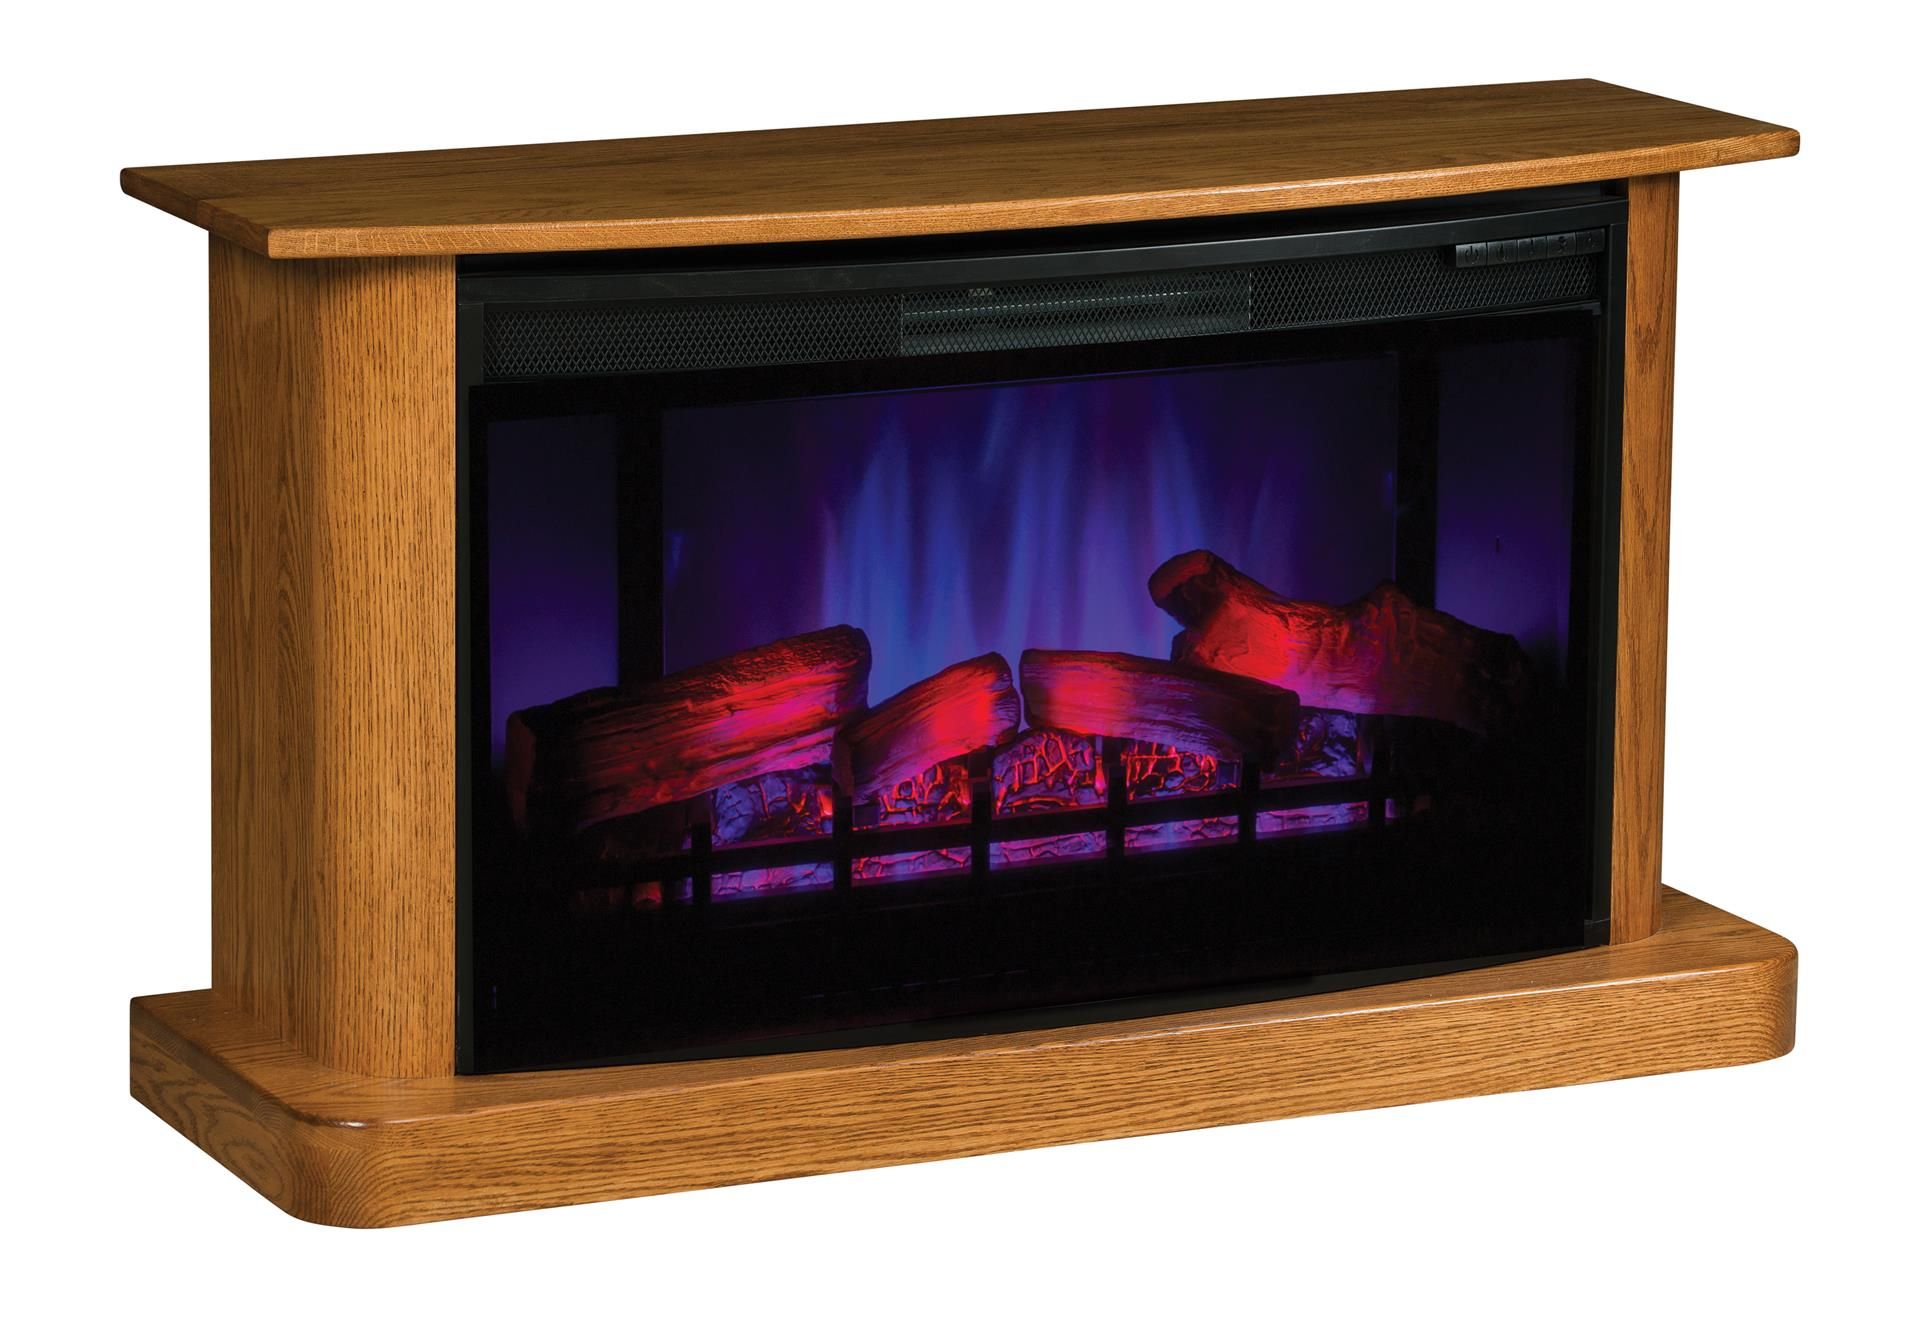 Best Prices On Electric Fireplaces New Amish Electric Fireplace with Remote